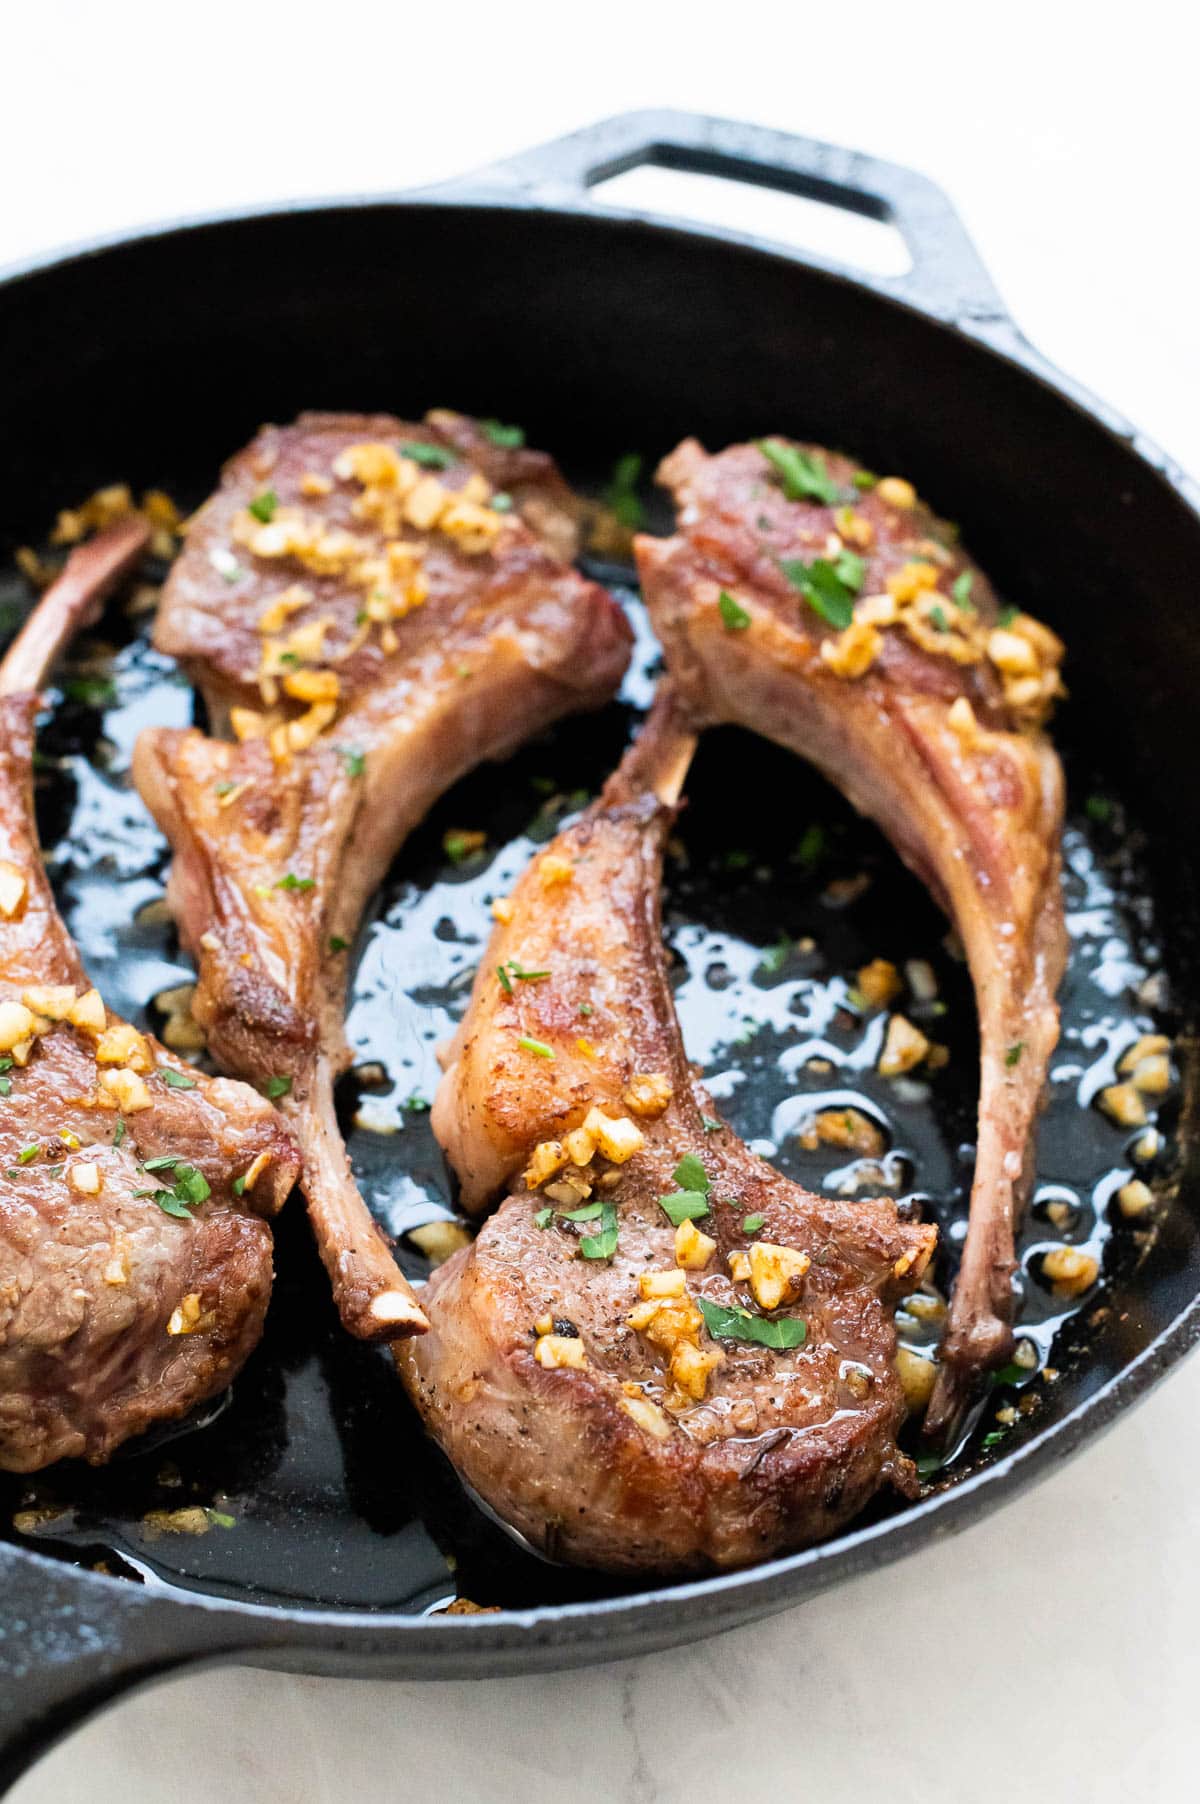 Four pan fried lamb chops with garlic butter and parsley in cast iron skillet.